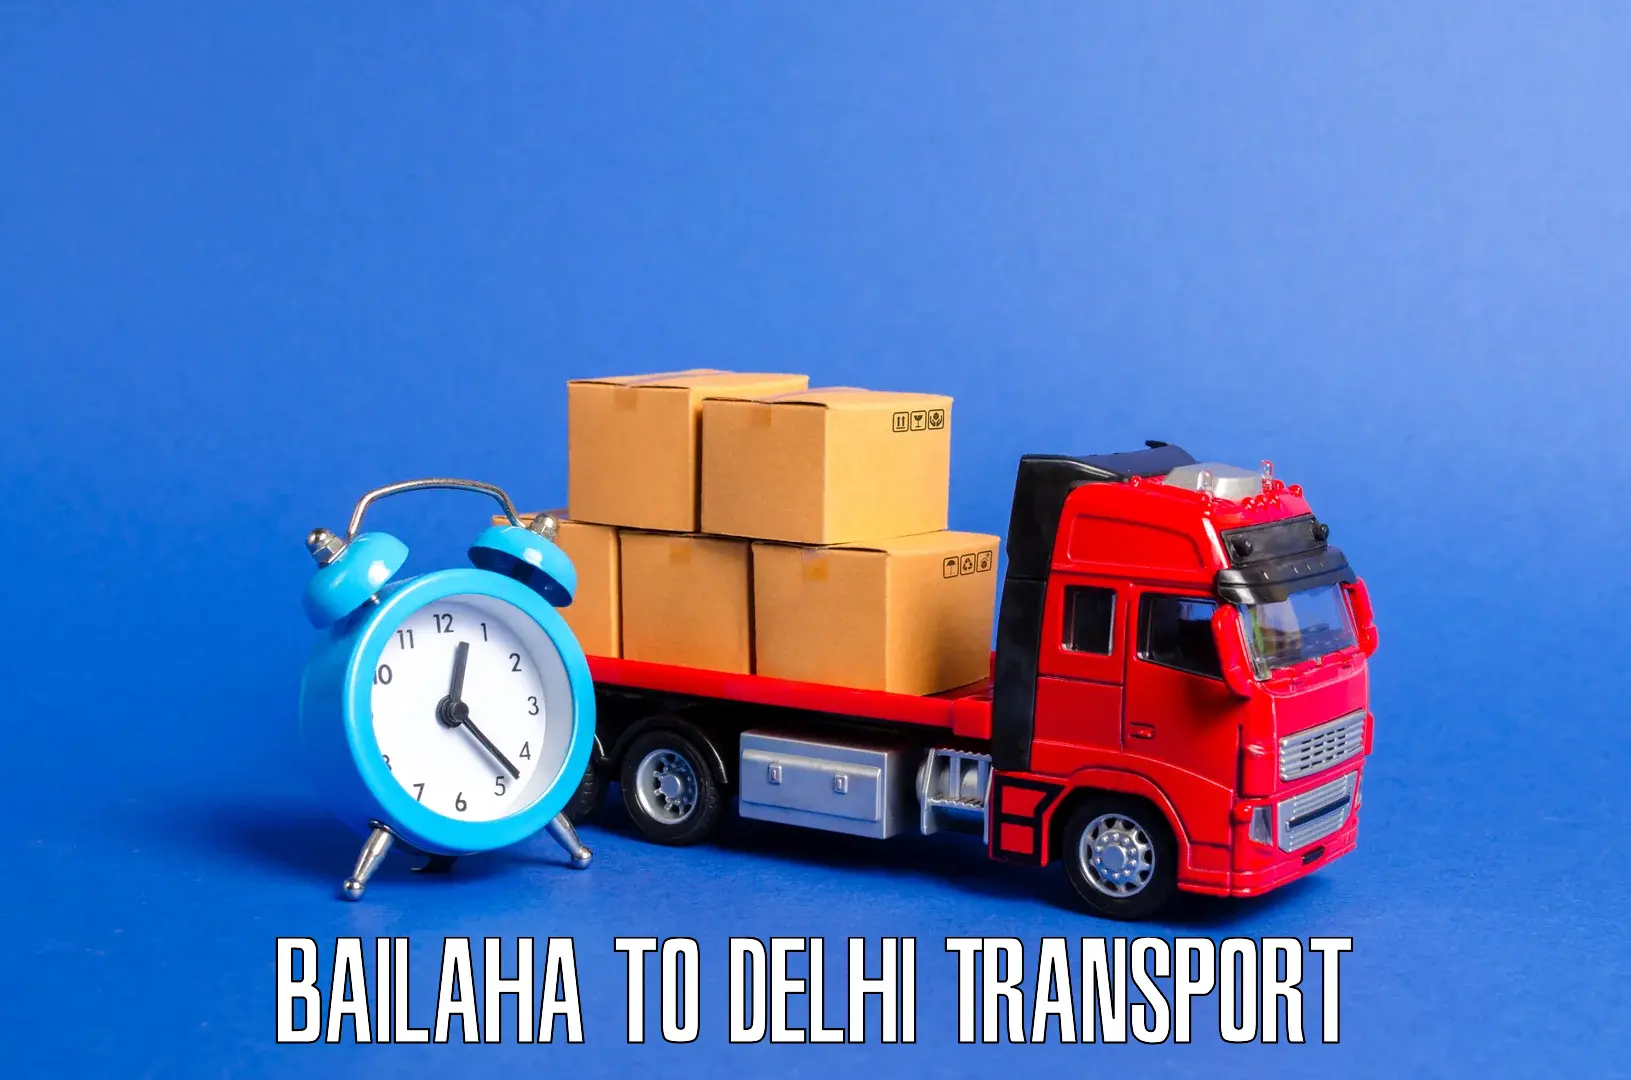 Parcel transport services Bailaha to NCR